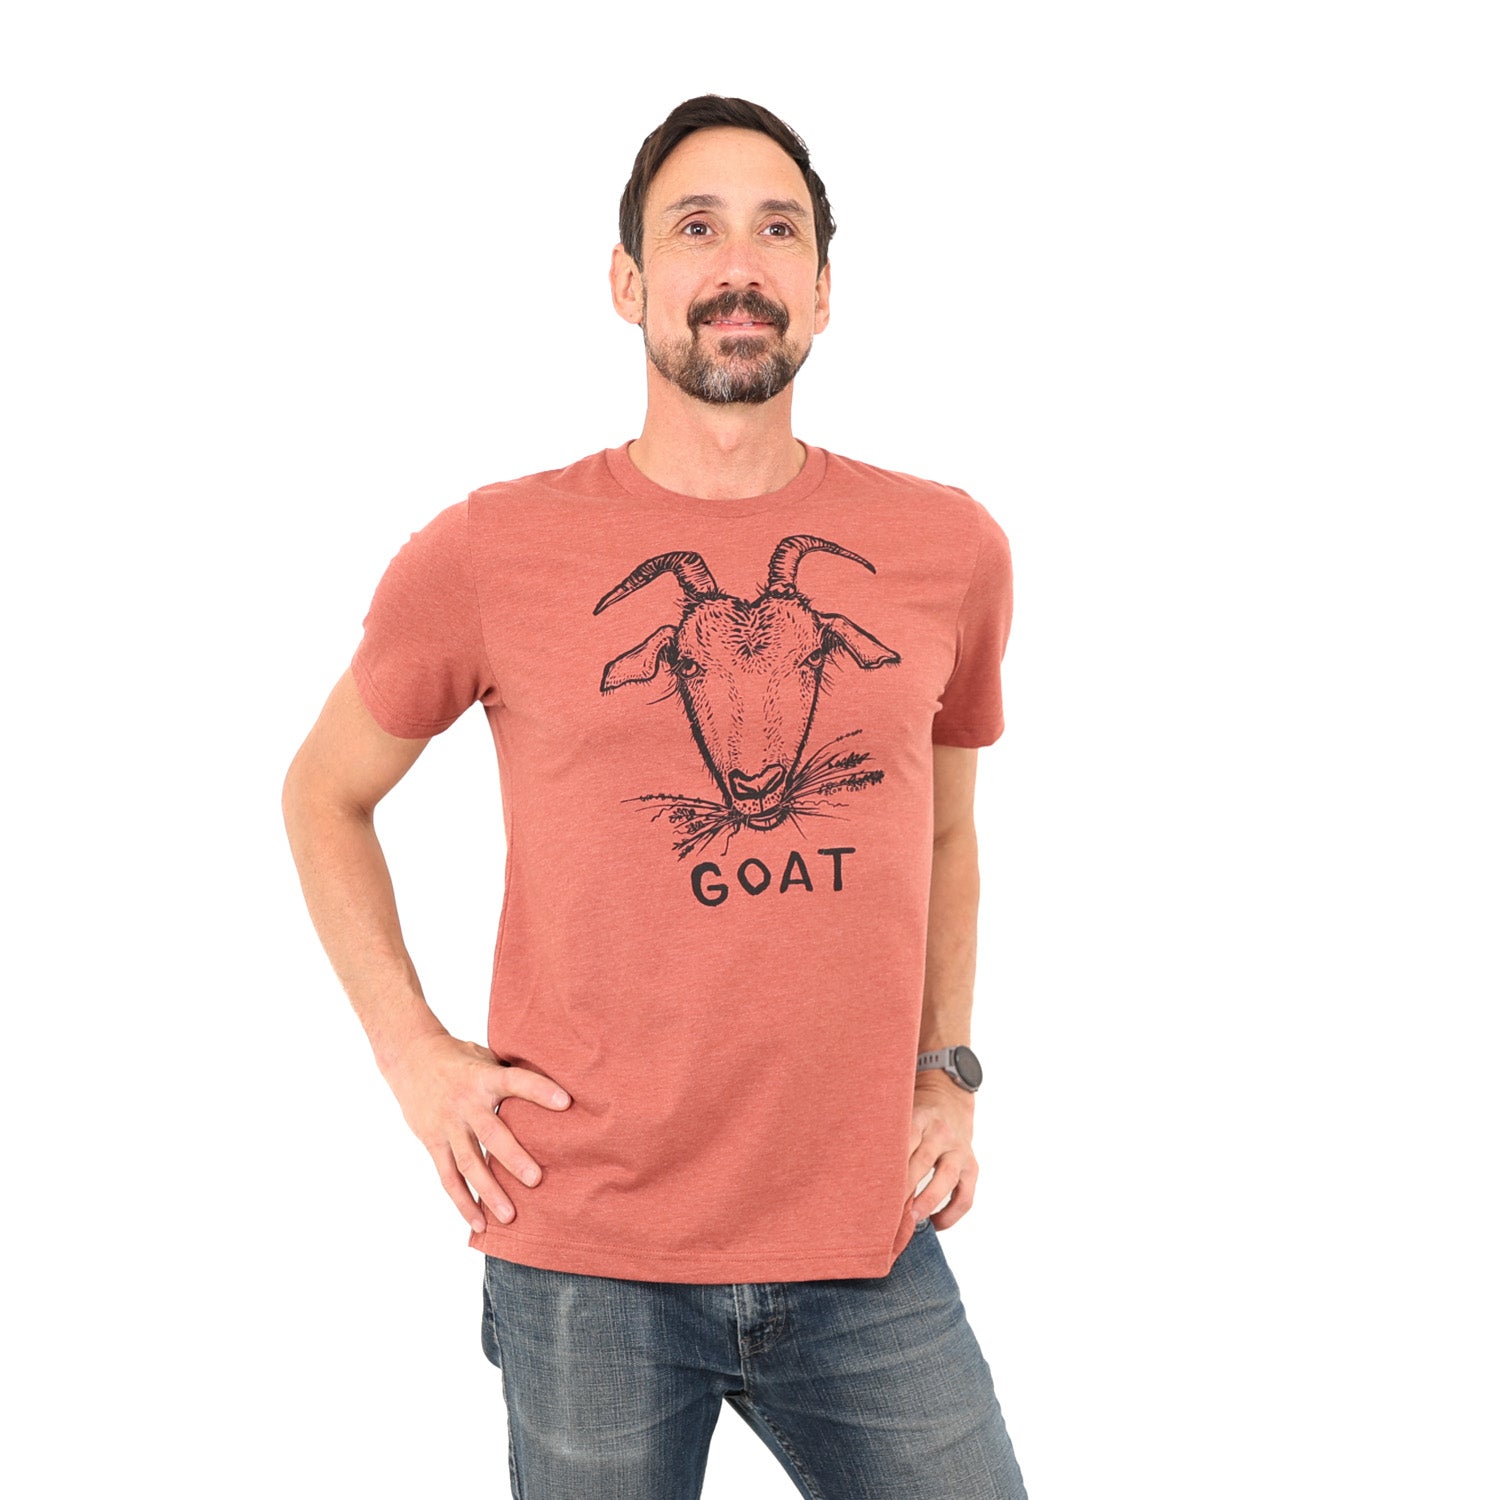 Man standing in white background, hands on his hips, wearing a clay colored shirt with a goat on it along with the word "goat"